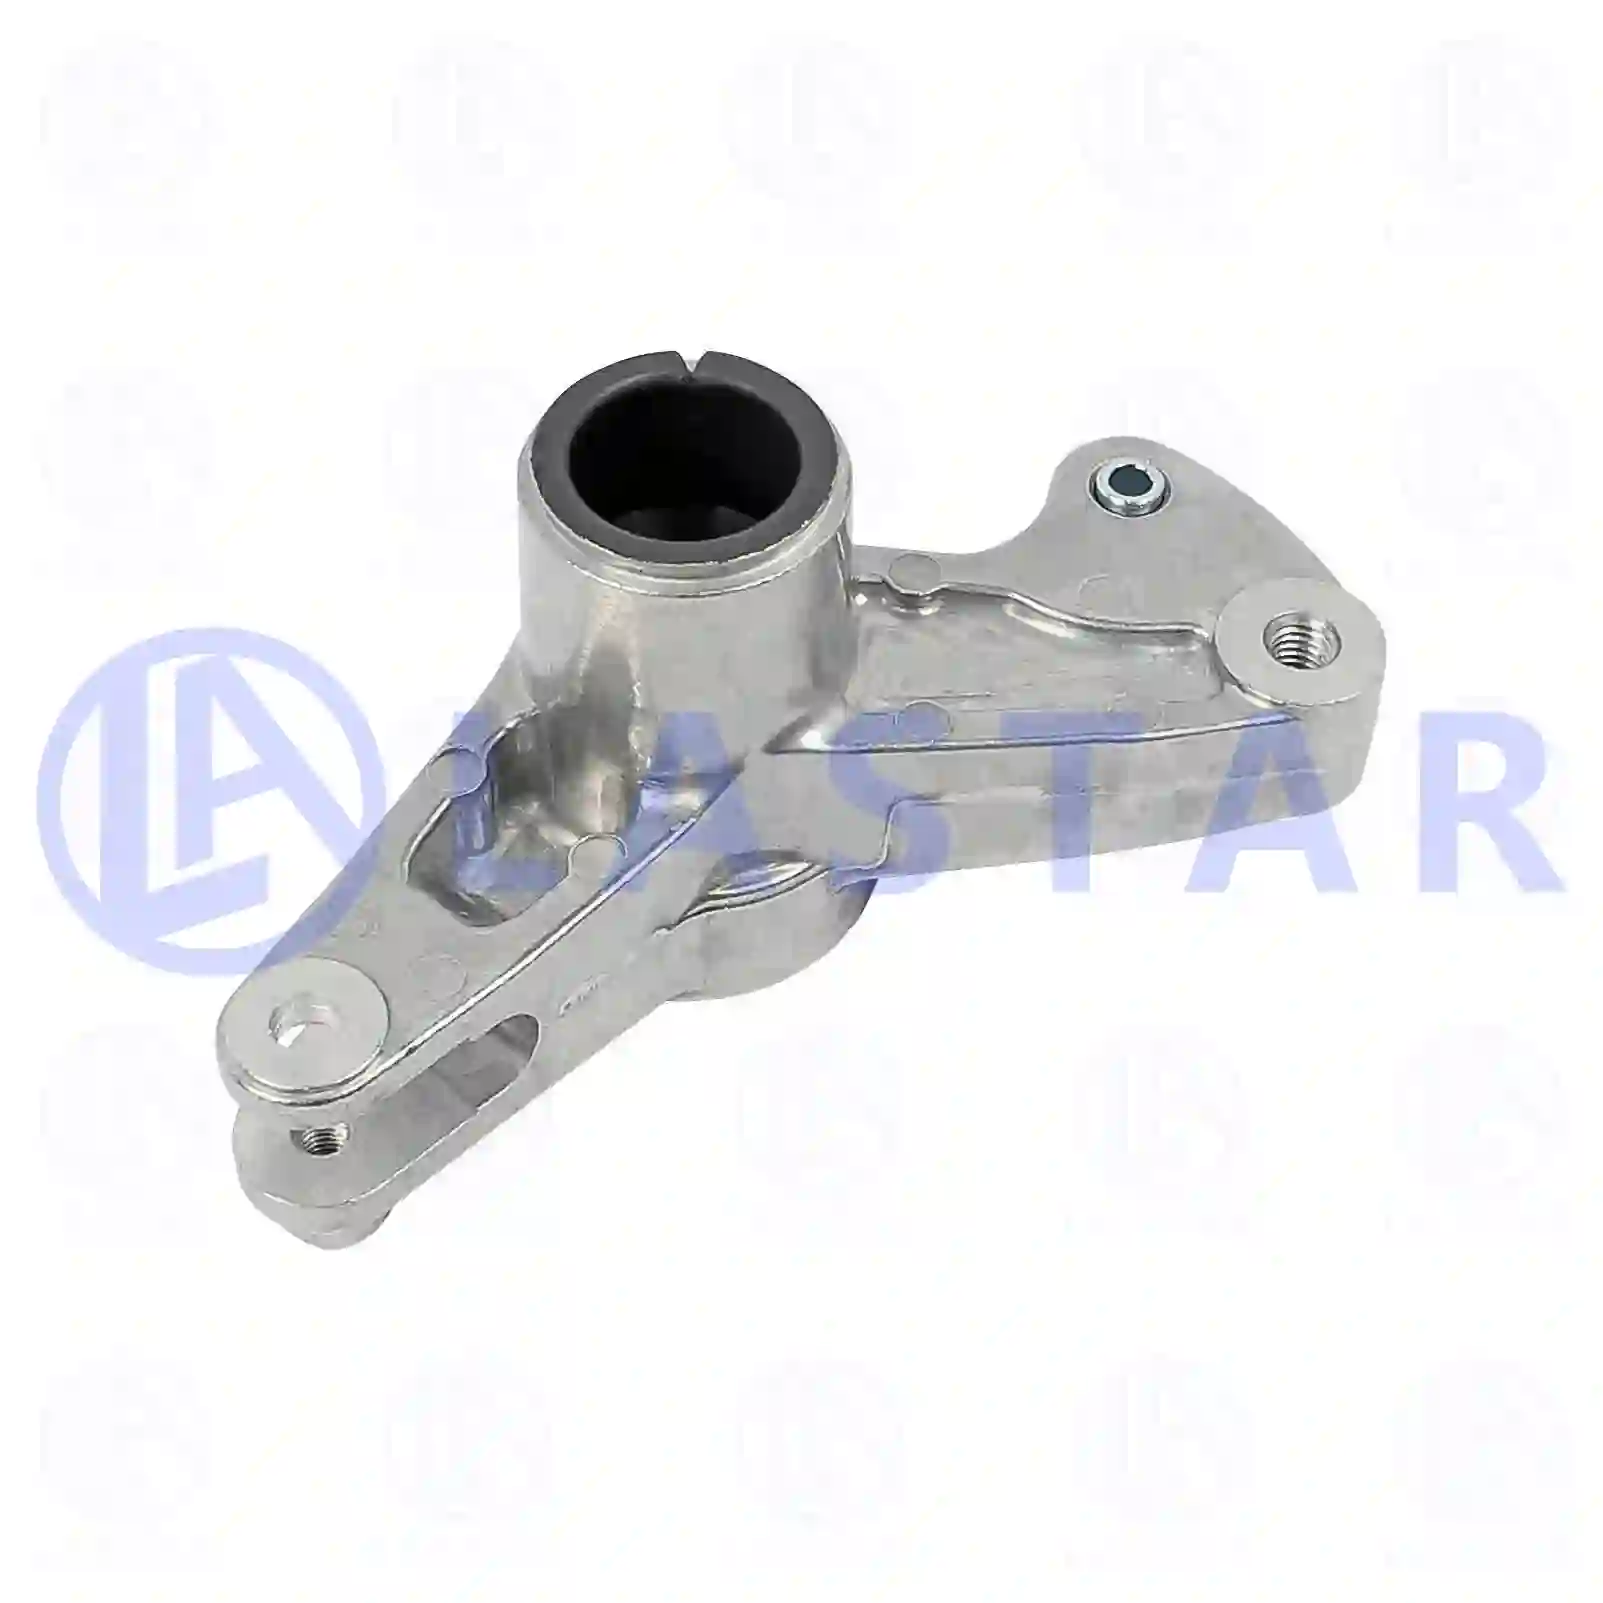 Lever, tension roller, 77708083, 6062000073, 6062000173, 606200017328 ||  77708083 Lastar Spare Part | Truck Spare Parts, Auotomotive Spare Parts Lever, tension roller, 77708083, 6062000073, 6062000173, 606200017328 ||  77708083 Lastar Spare Part | Truck Spare Parts, Auotomotive Spare Parts